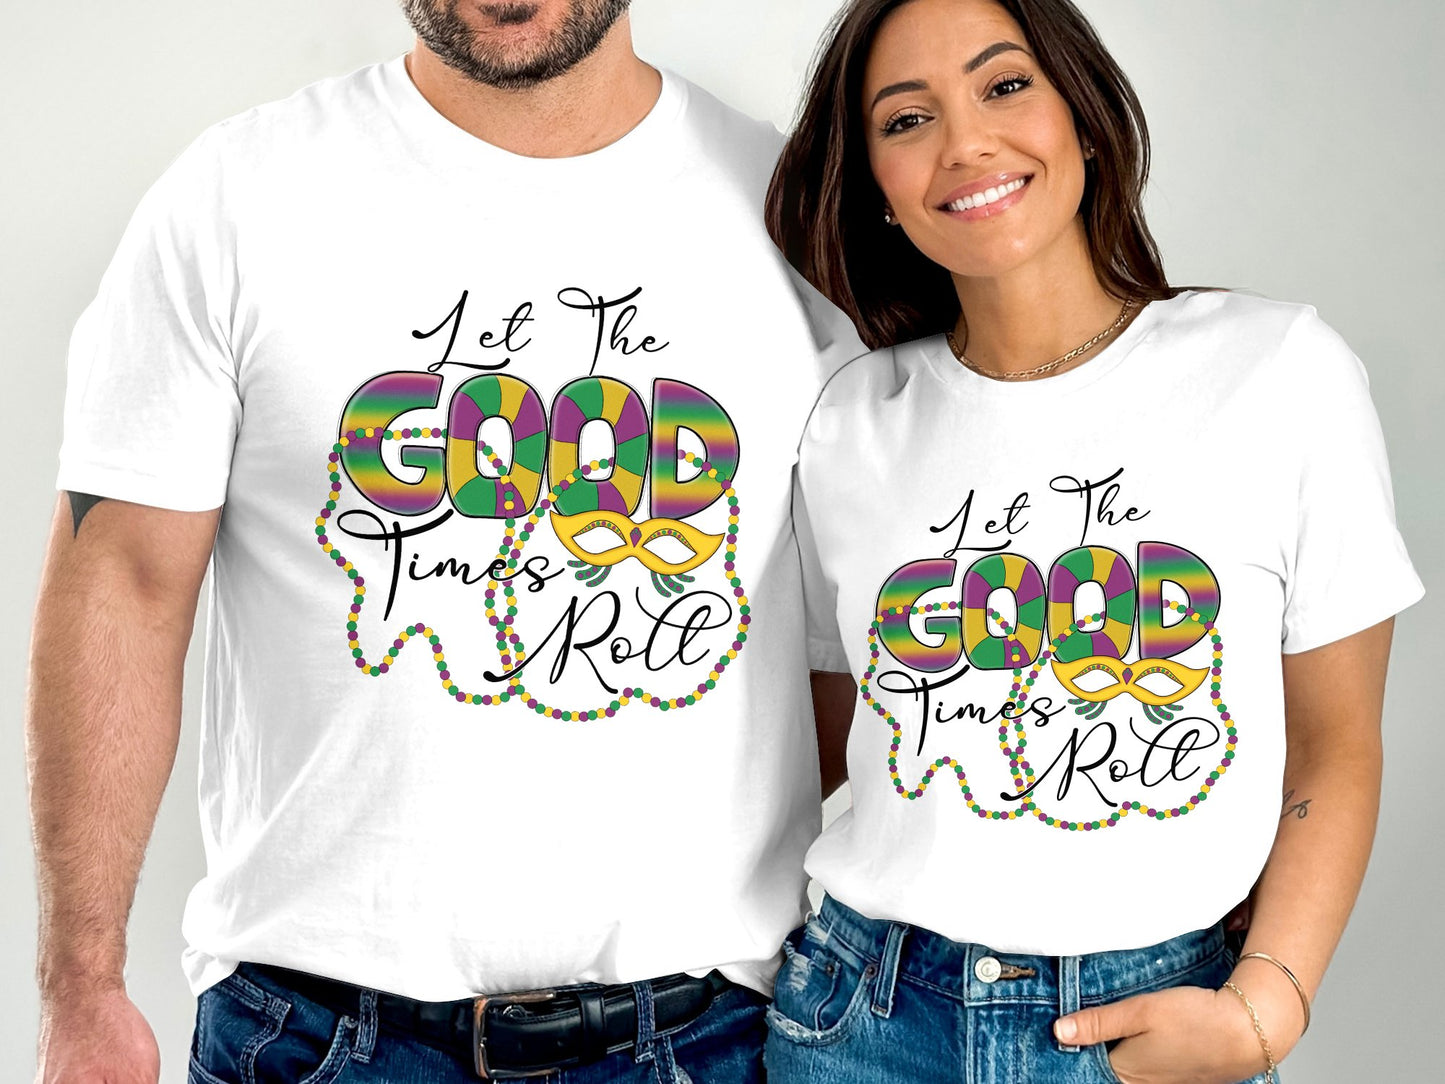 Let the Good Times Roll Mardi Gras T-shirt